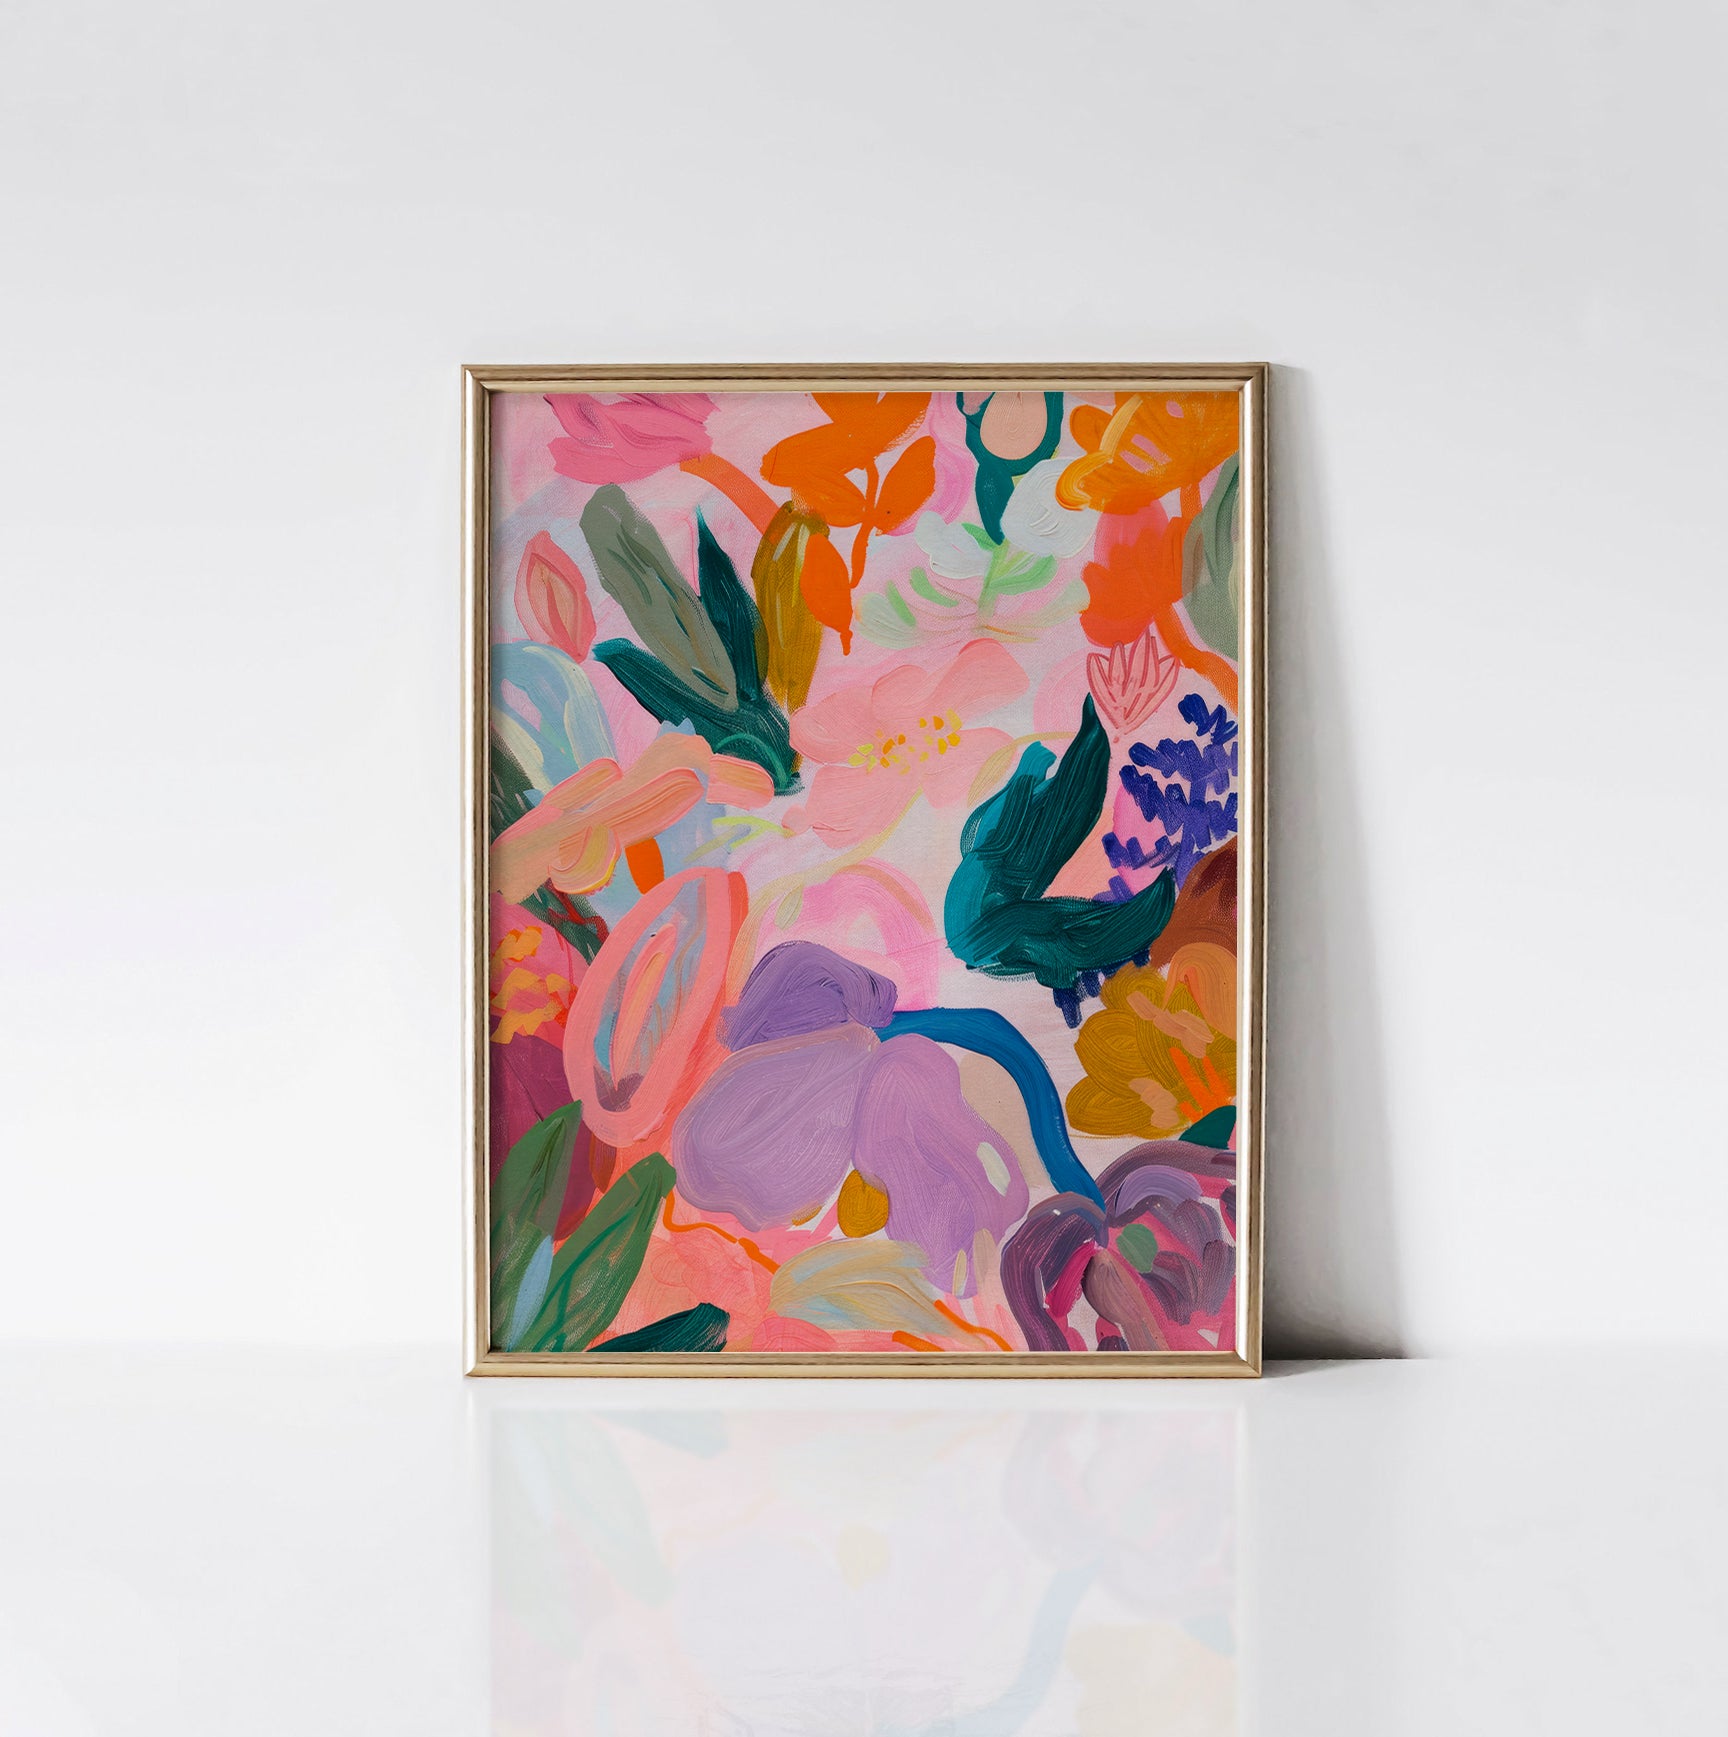 Abstract Floral Harmony Art Print framed in an elegant gold frame, showcasing a dynamic blend of colorful abstract flowers in pink, orange, green, and purple